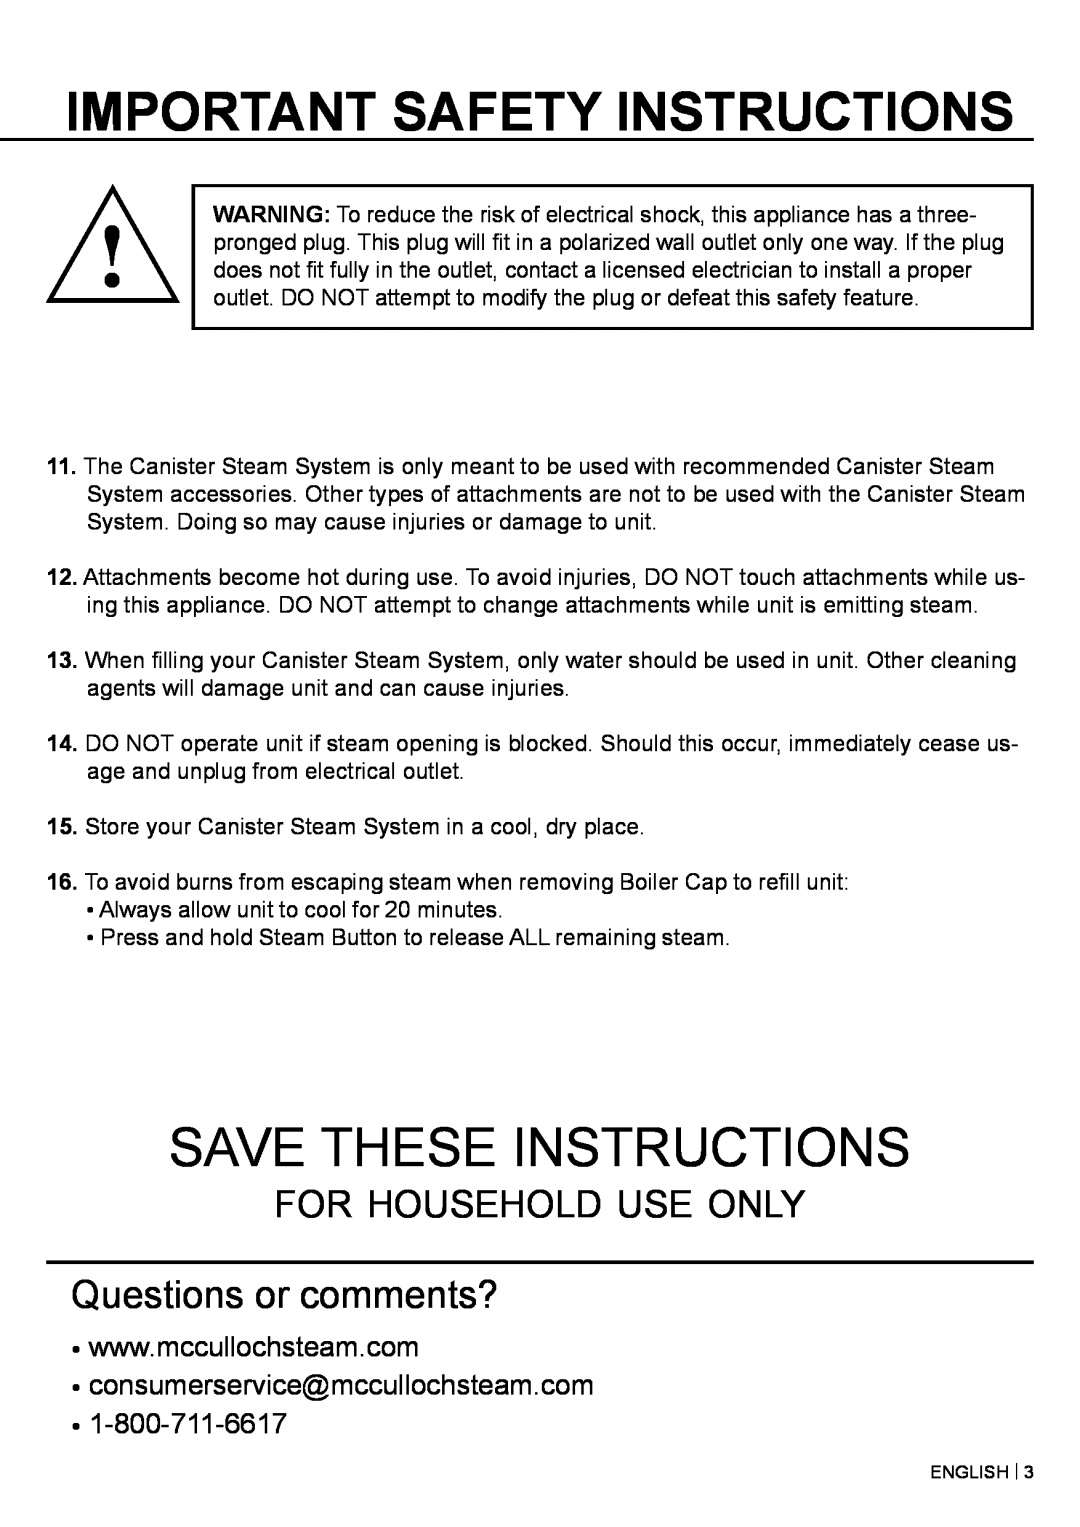 McCulloch MC1375 Important Safety Instructions, Save These Instructions, for household use only Questions or comments? 